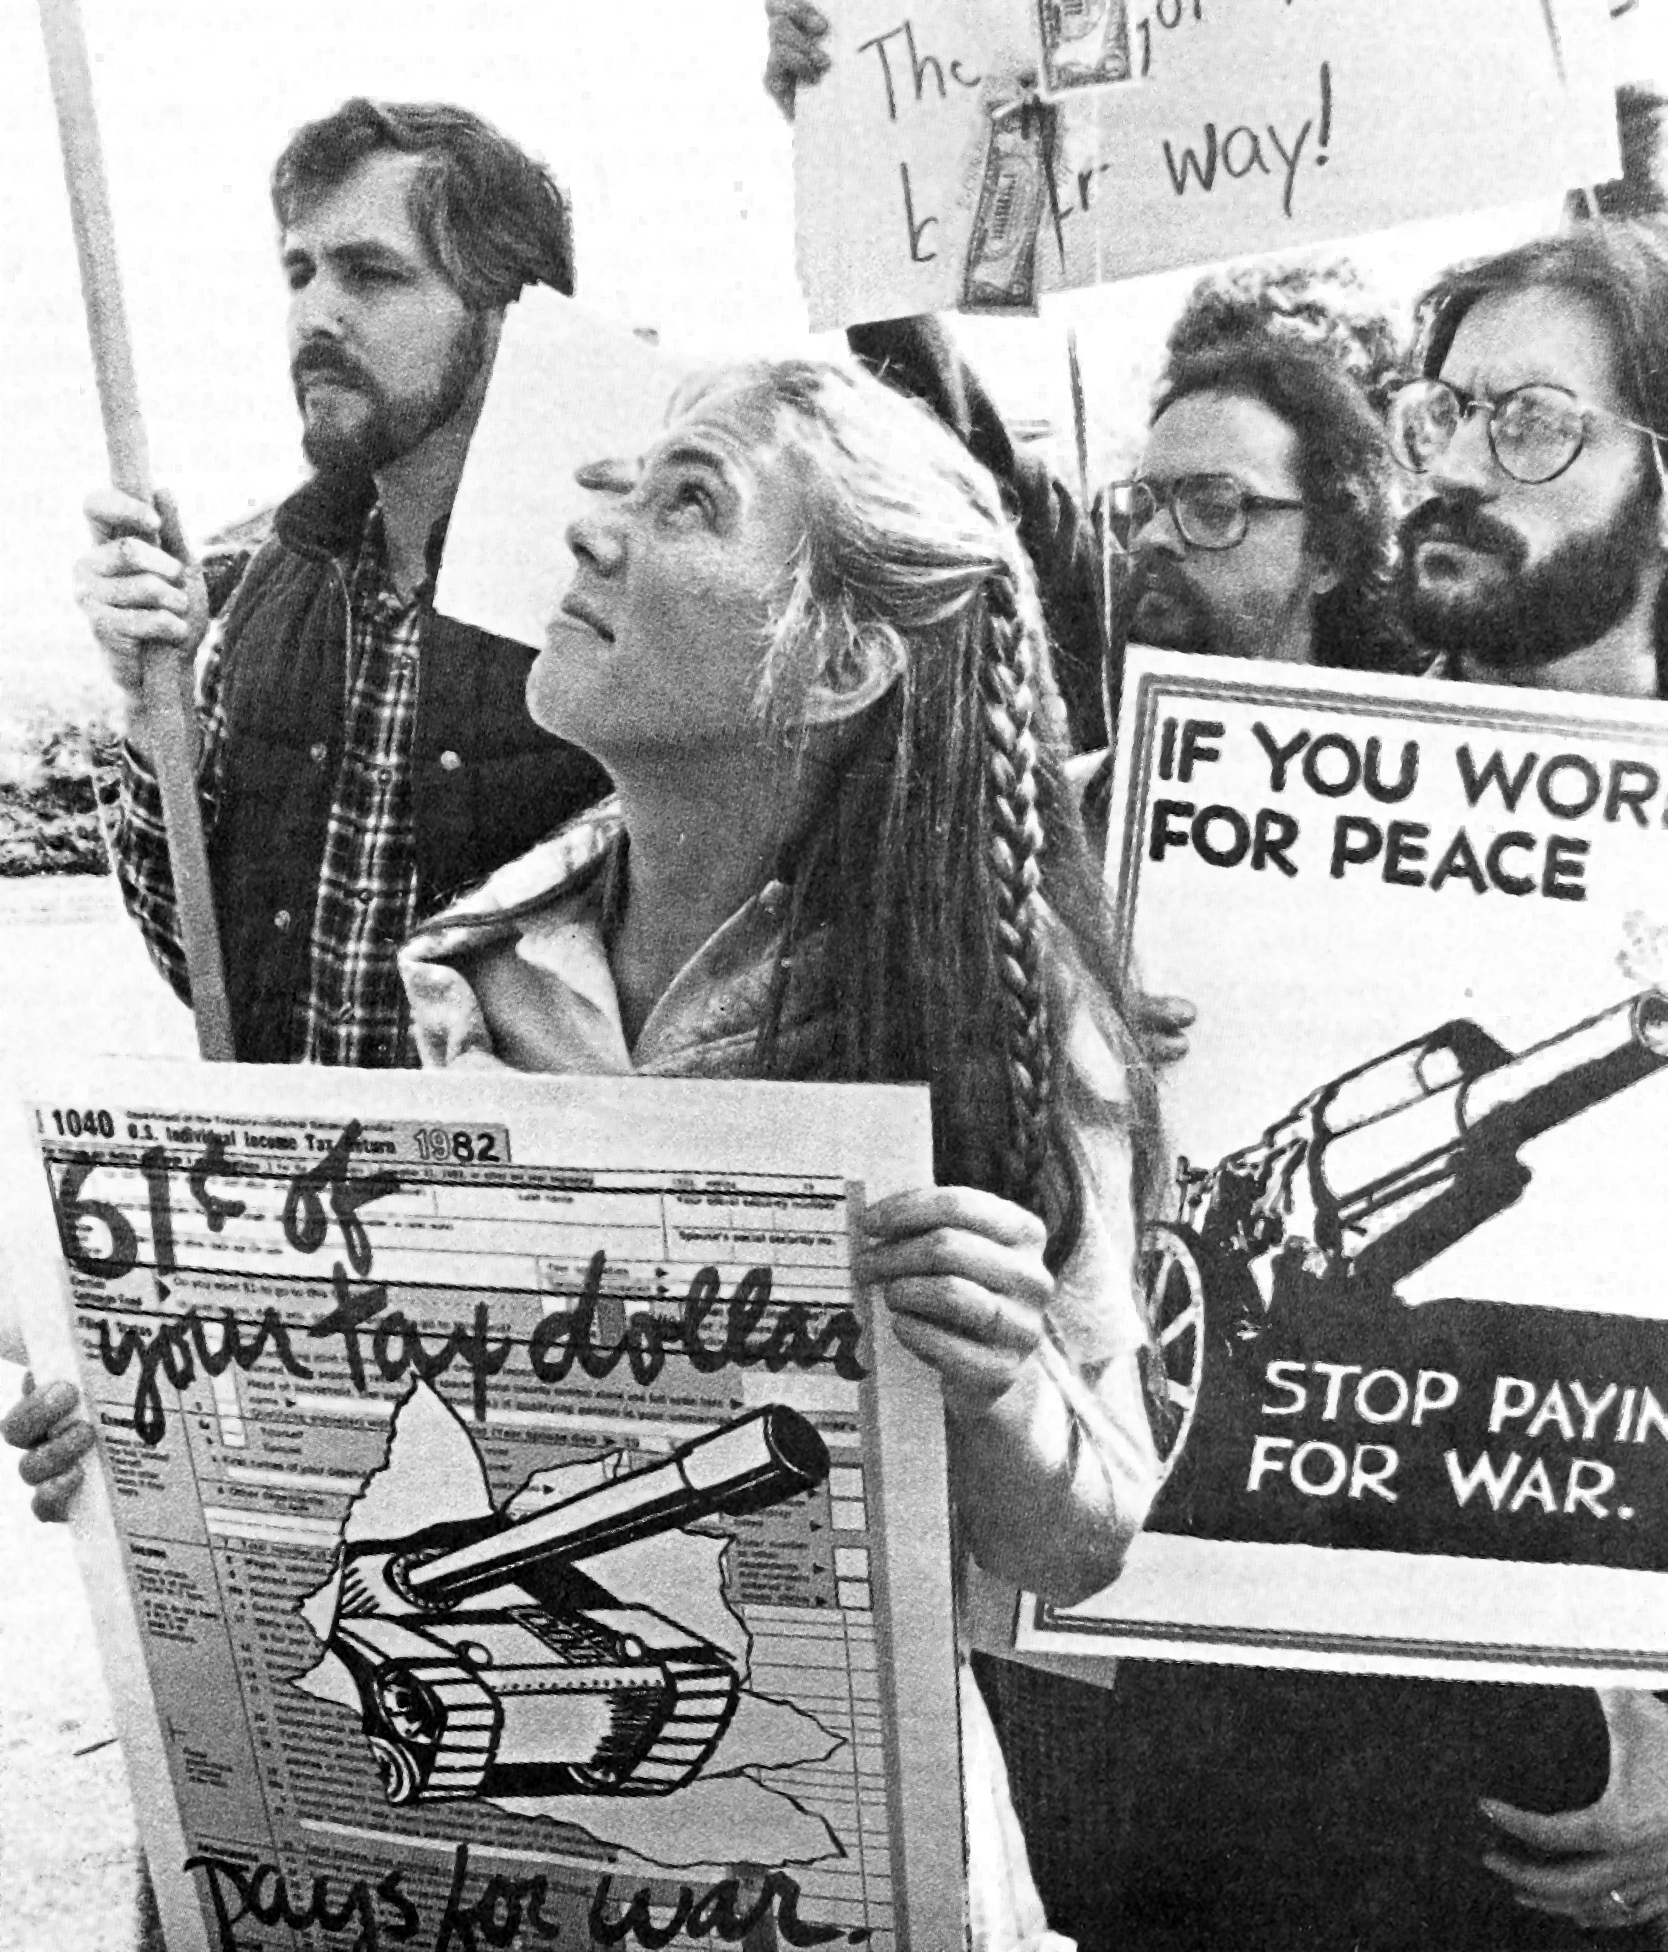 several people carrying signs with slogans like “If you work for peace, stop paying for war” and “61¢ of your tax dollar pays for war”